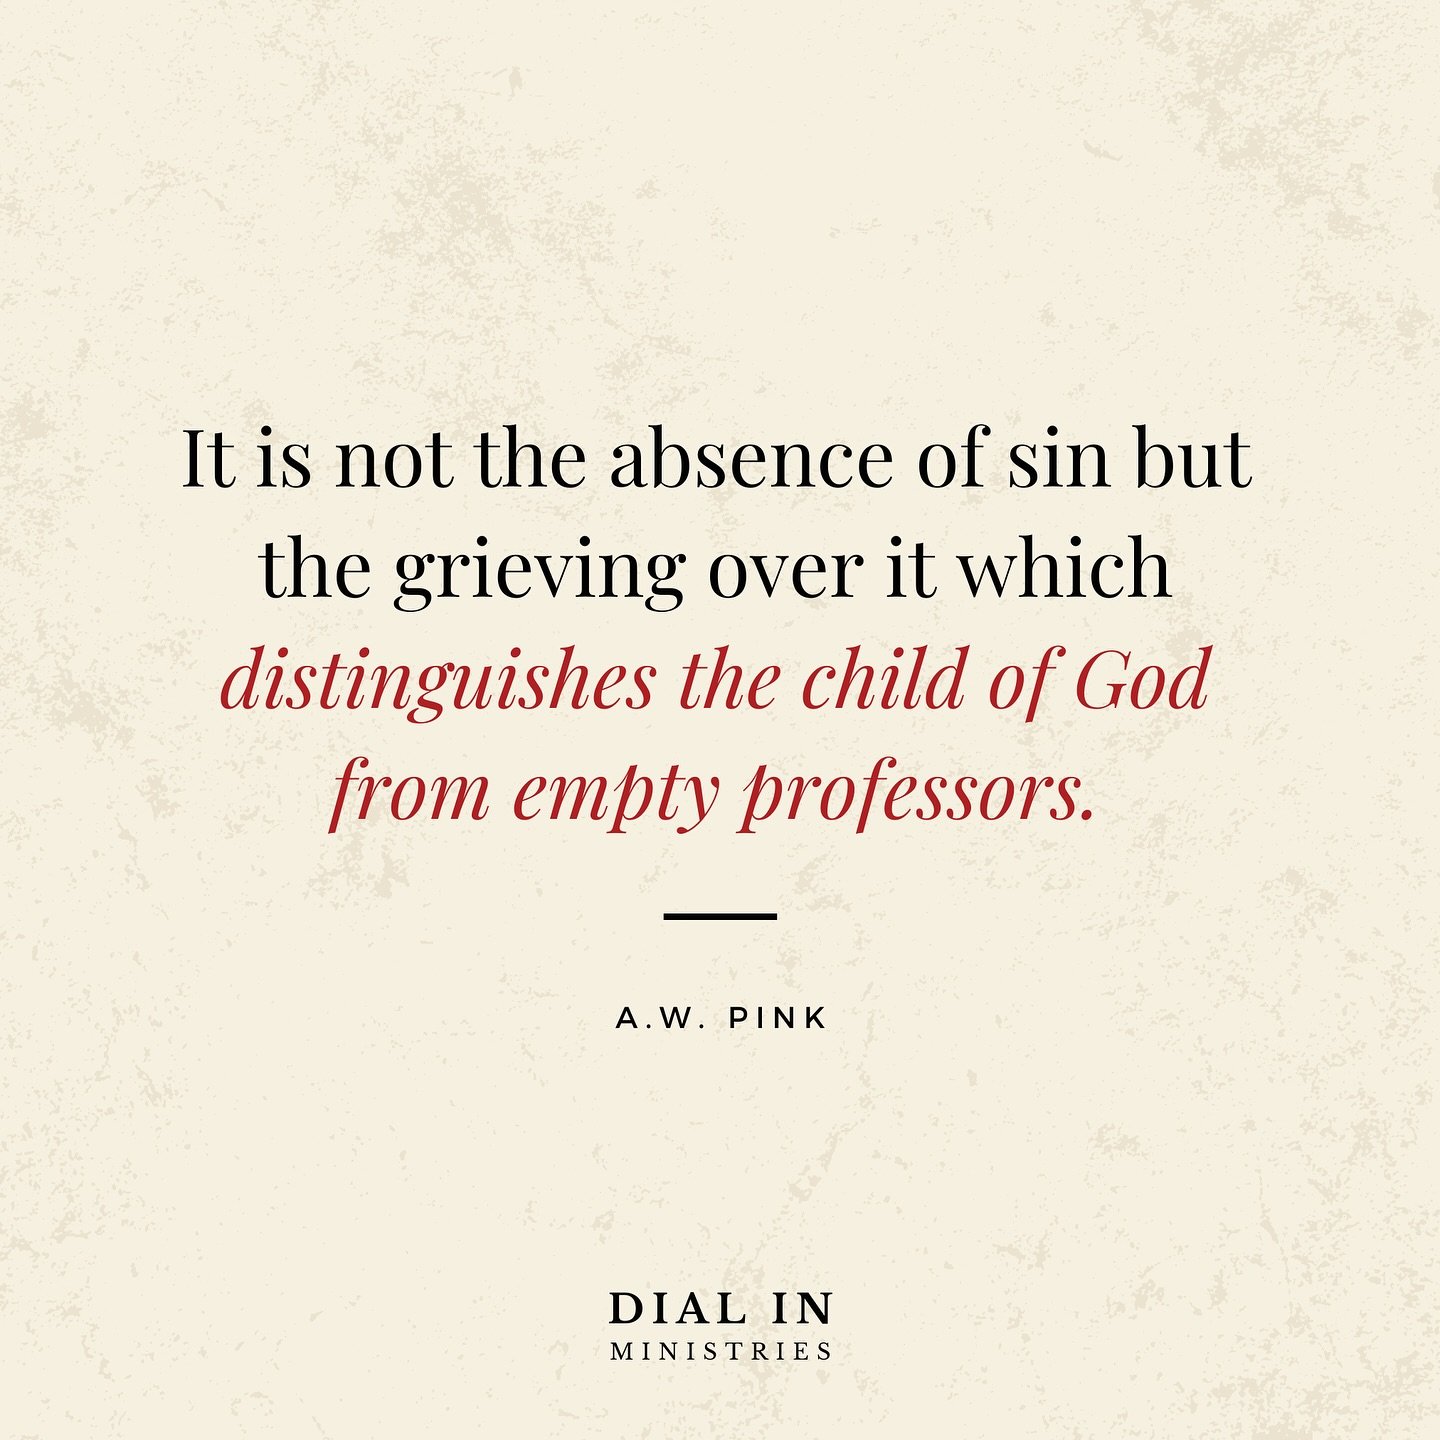 &ldquo;It is not the absence of sin but the grieving over it which distinguishes the child of God from empty professors.&rdquo;
A.W. Pink